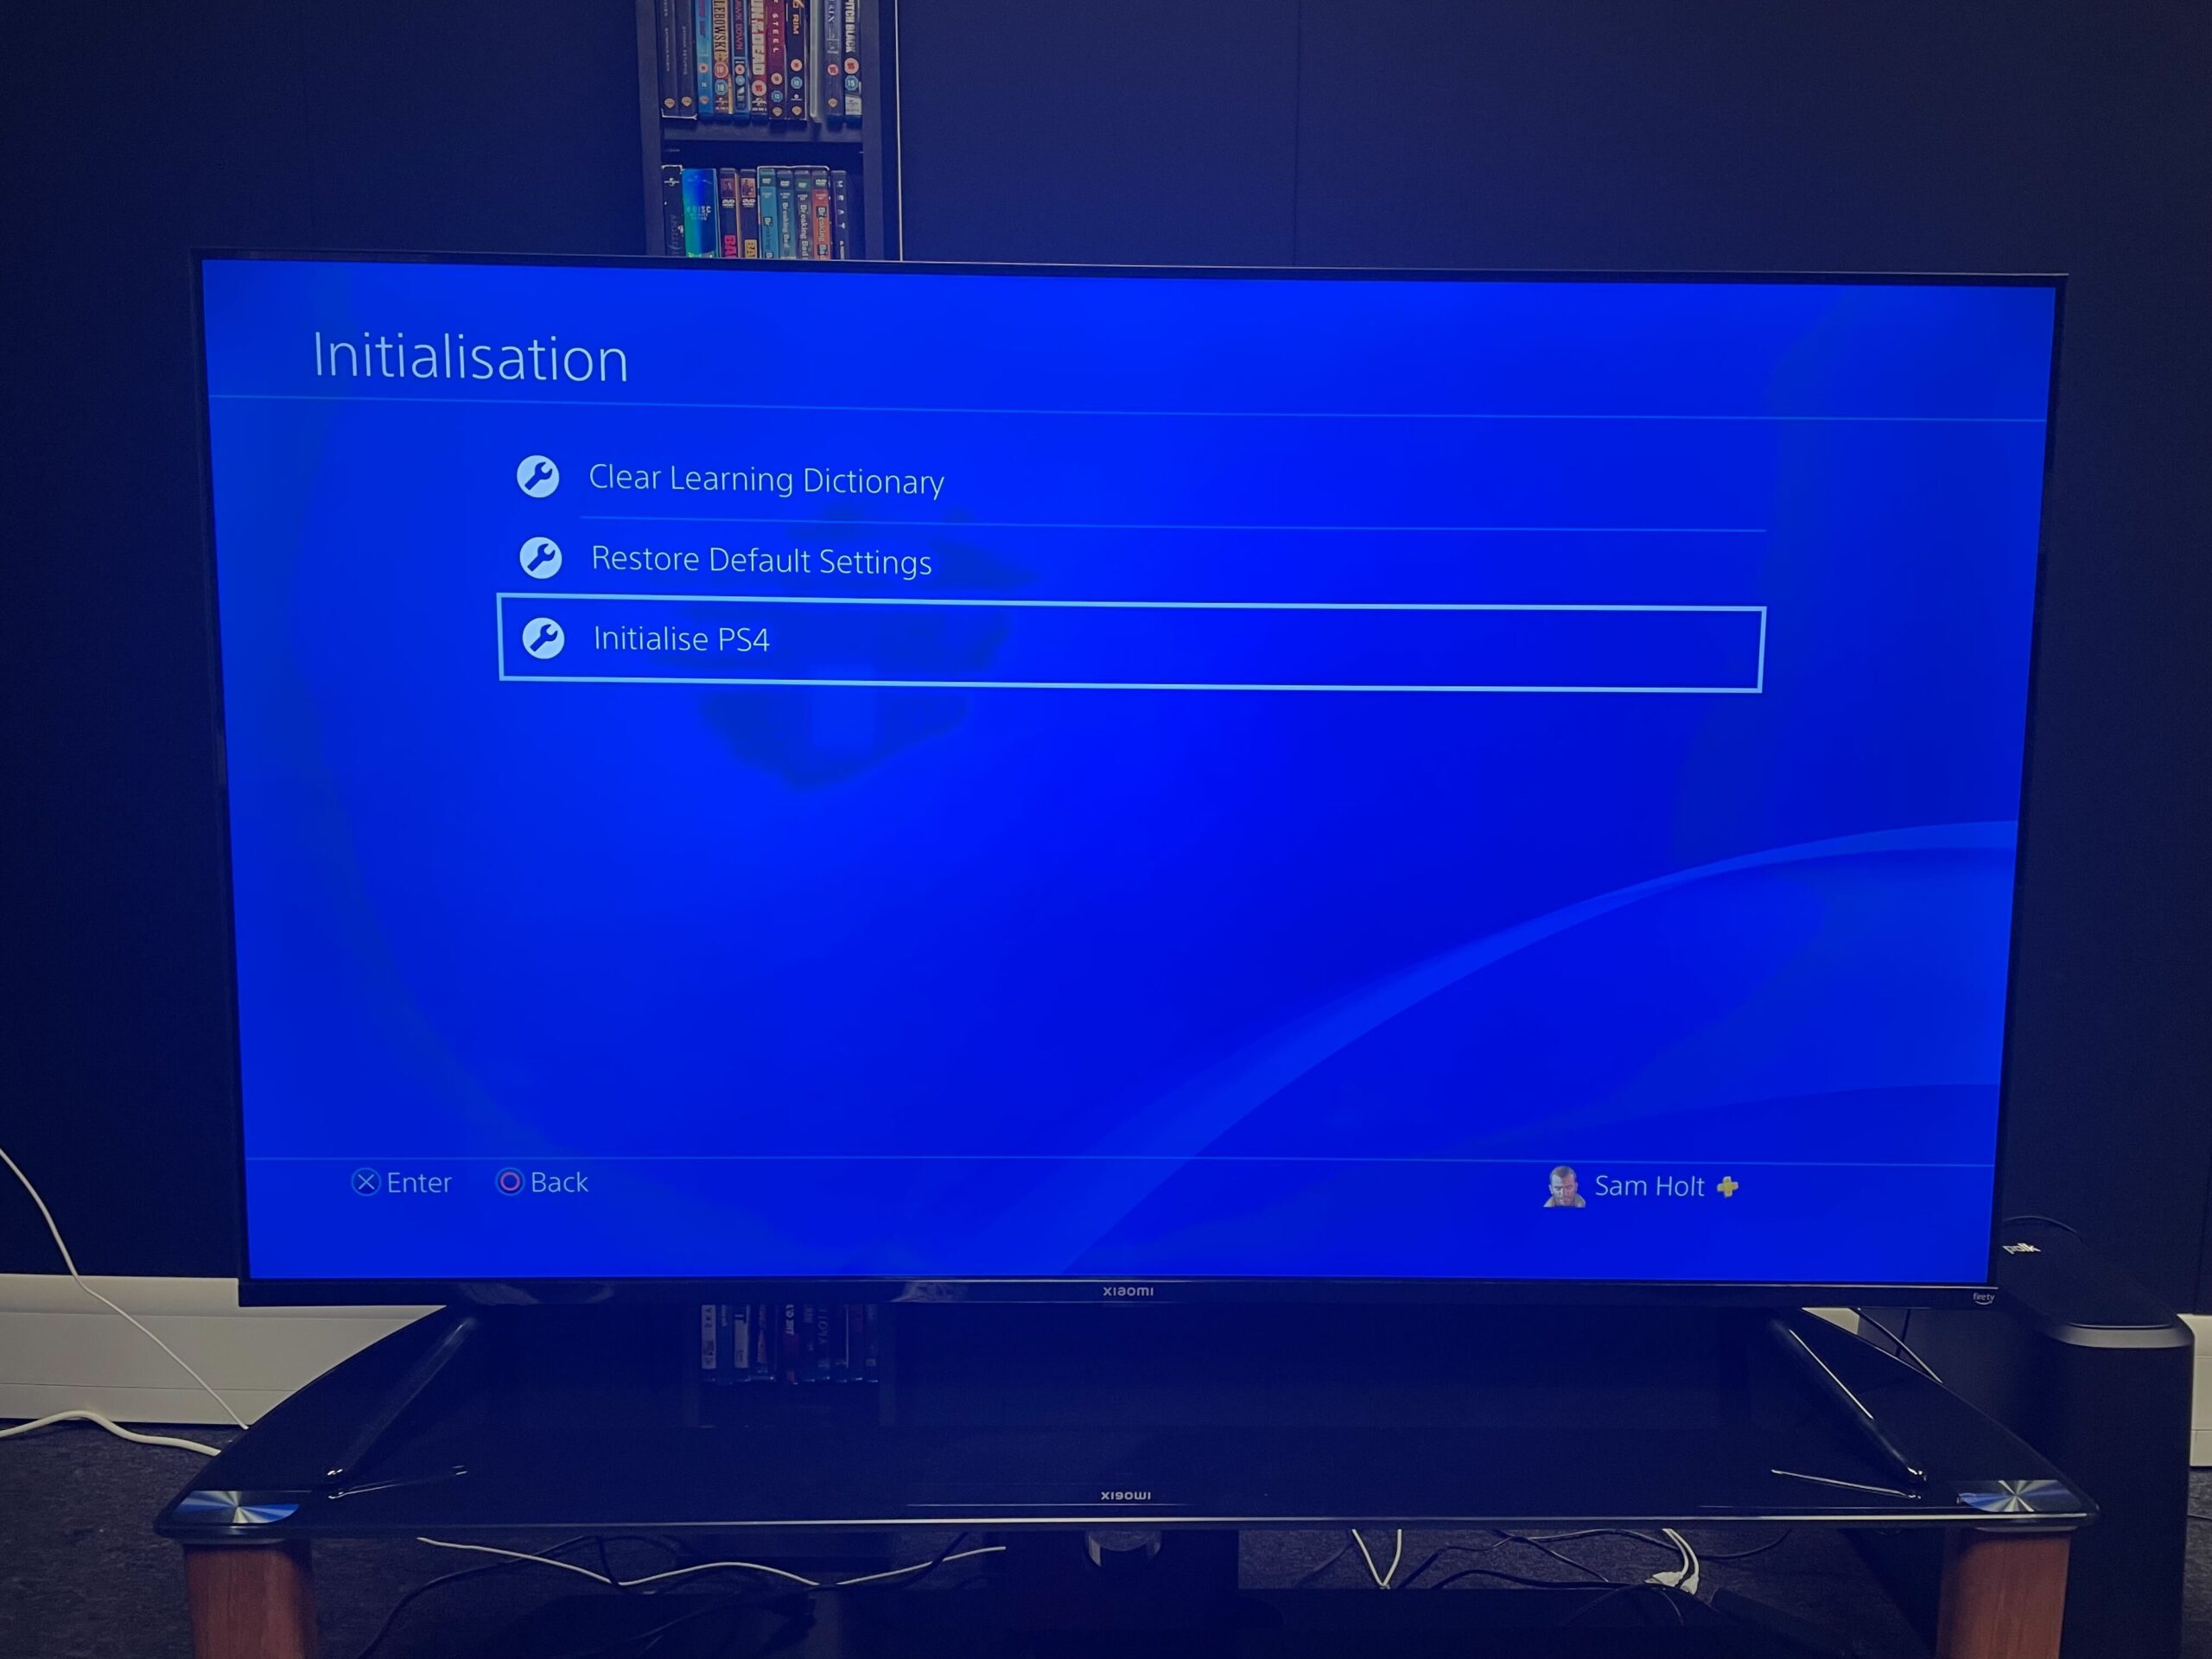 Initialize the PS4